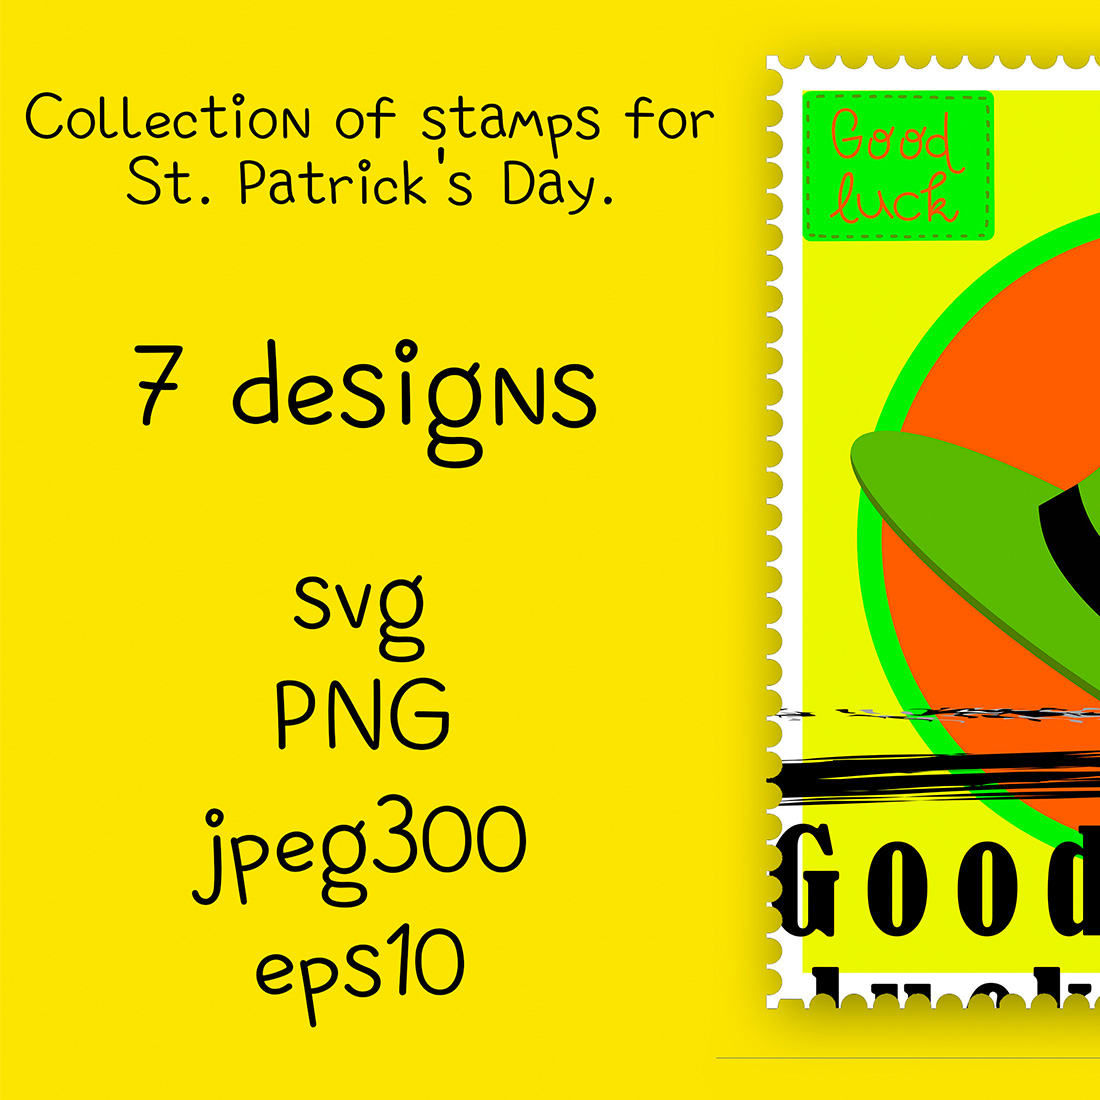  We are glad to present you a set of postage stamps for St. Patrick's Day.